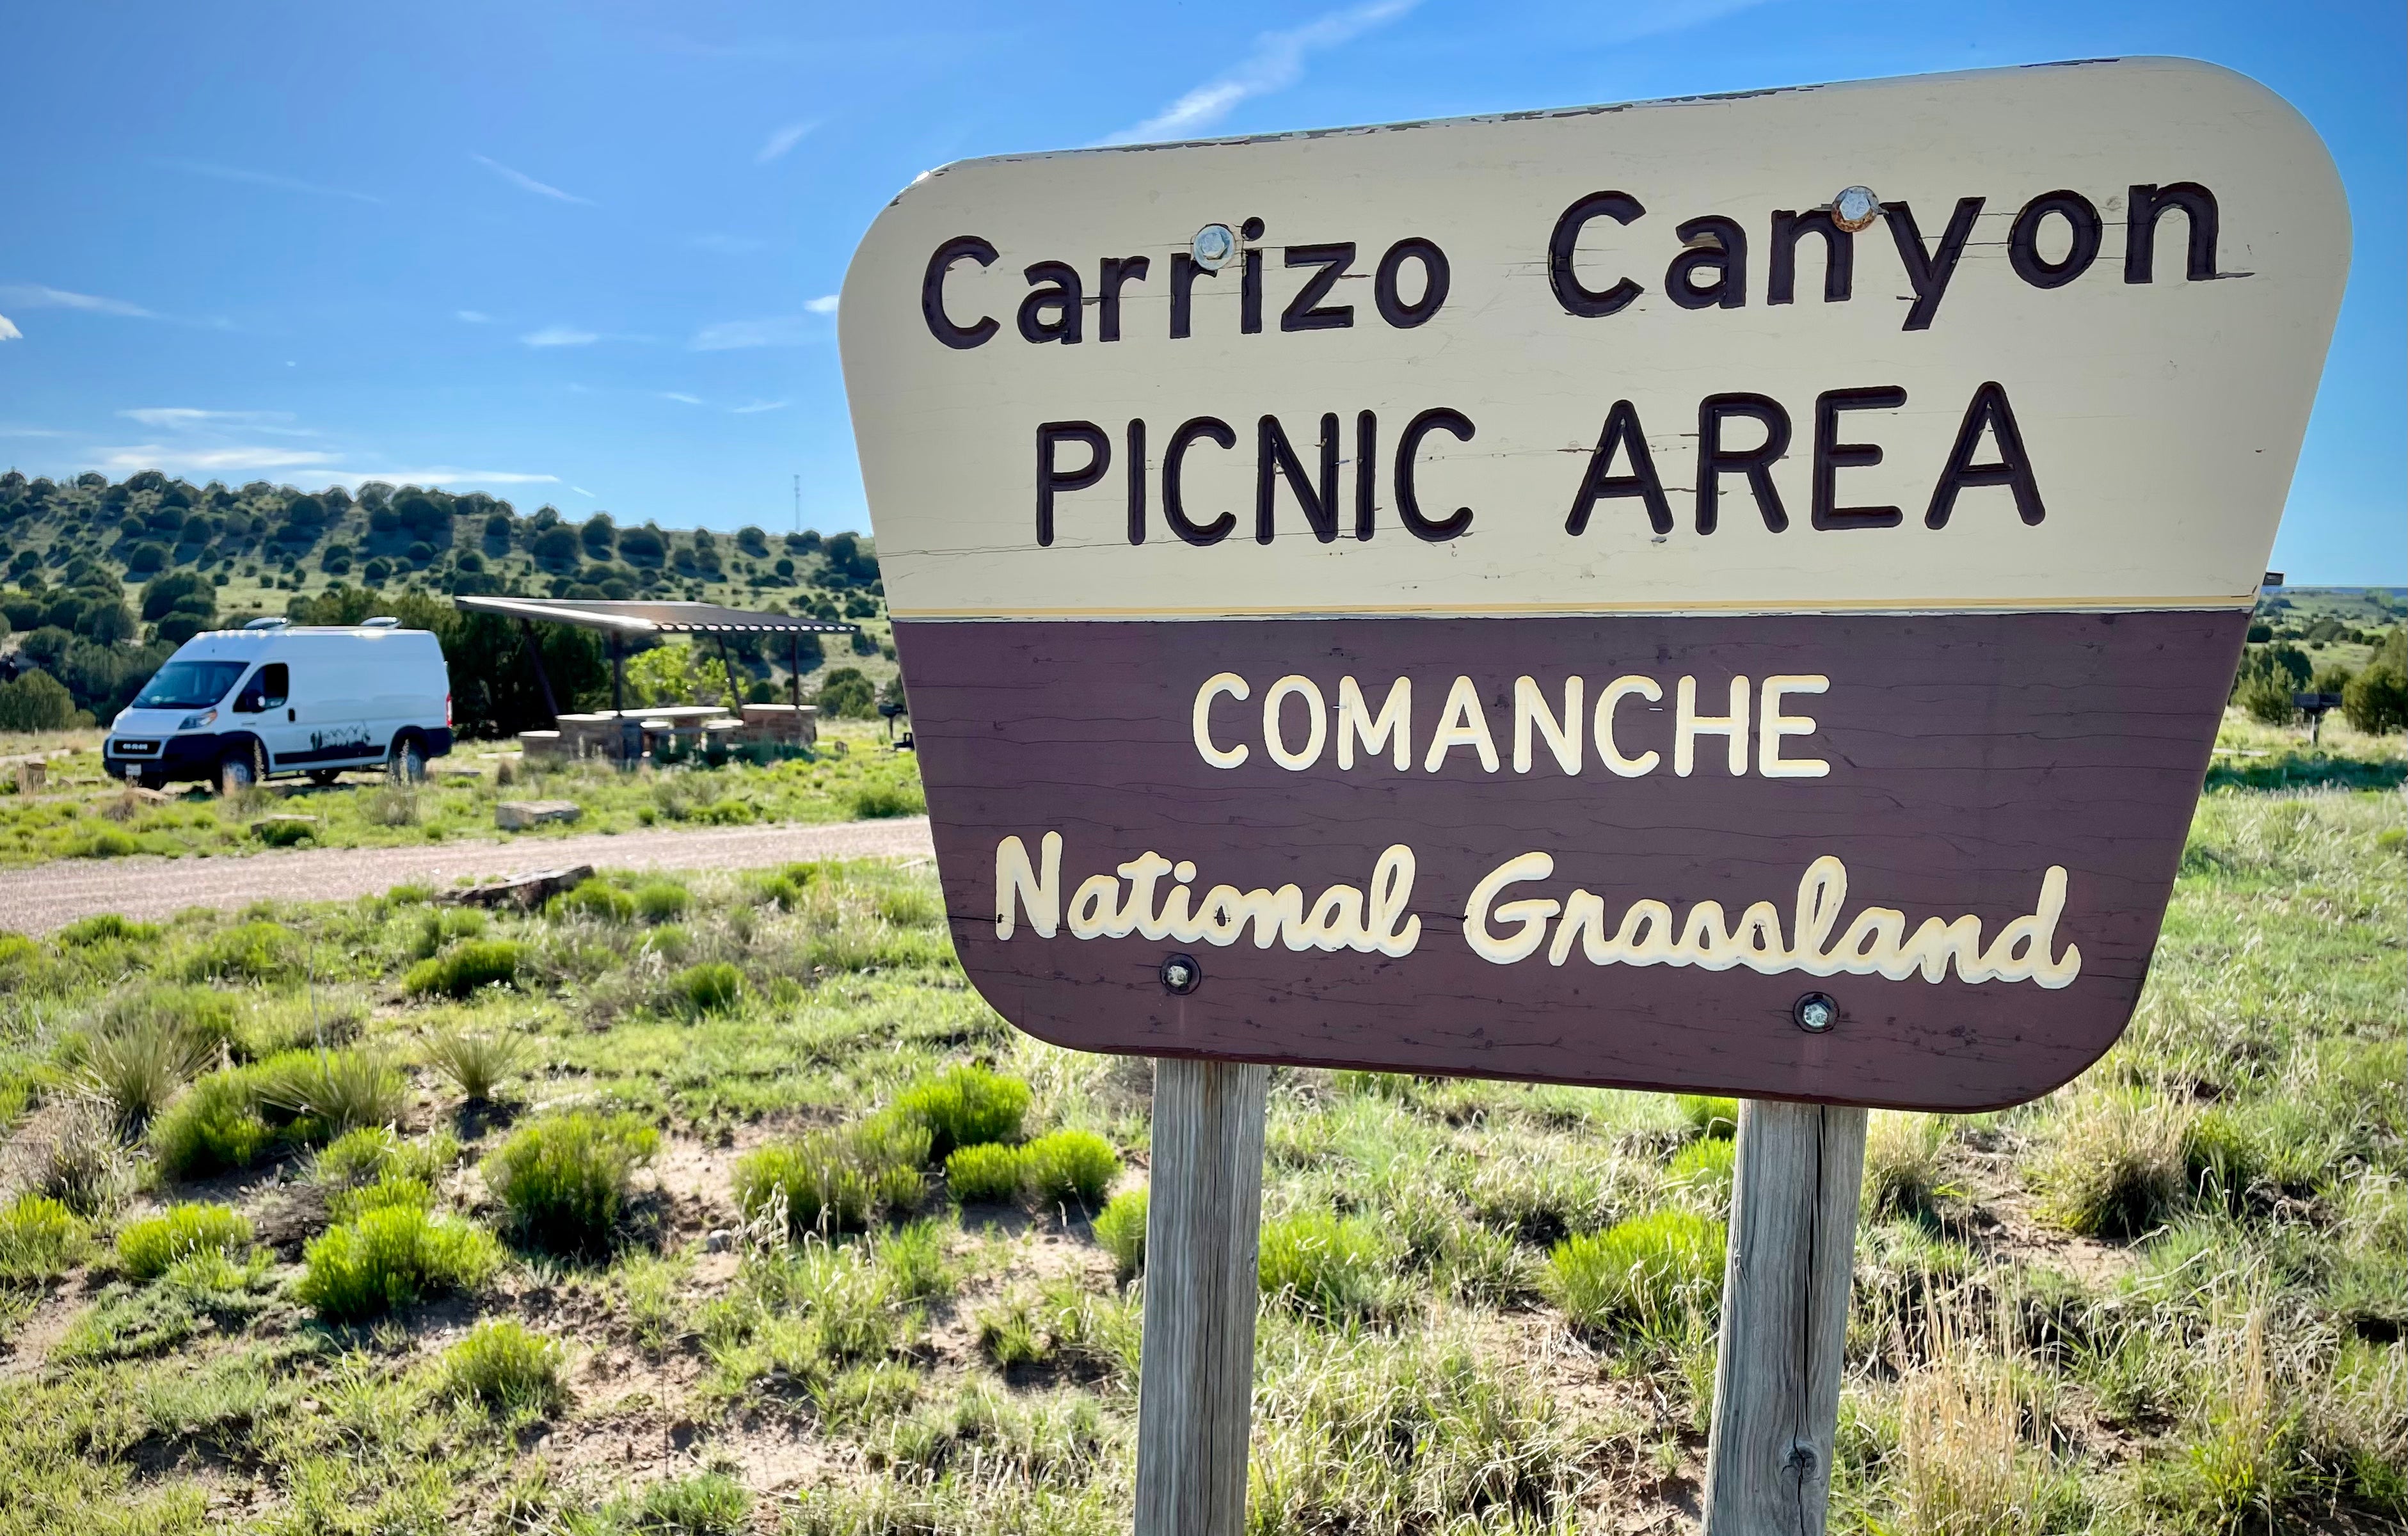 Camper submitted image from Carizzo Canyon Picnic Area, Comanche National Grassland - 1